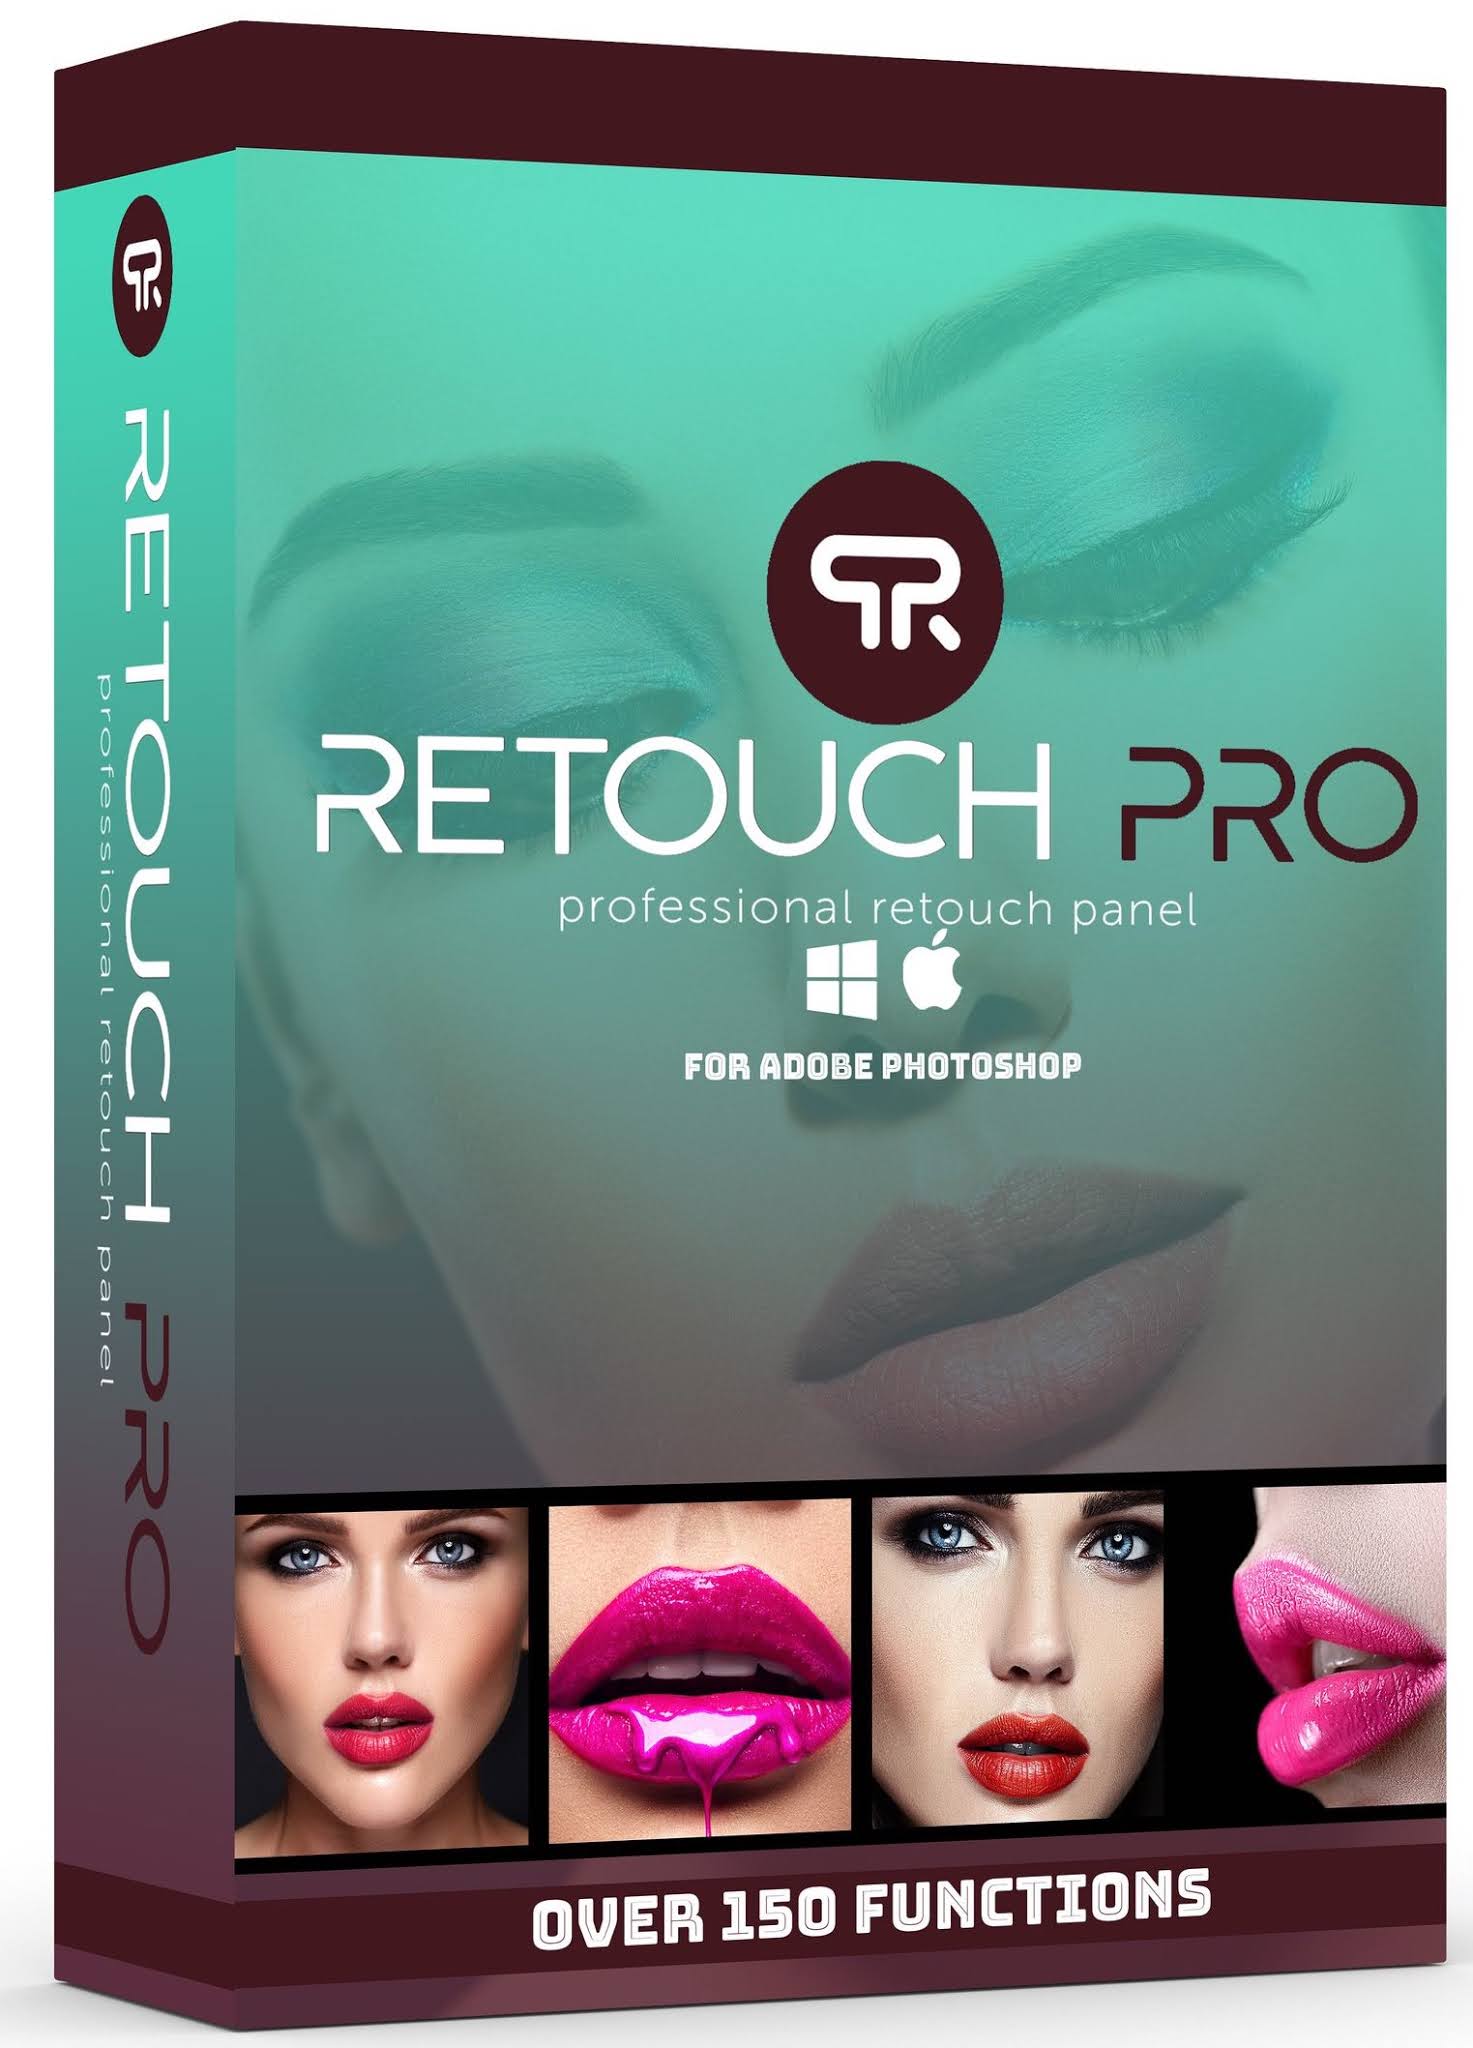 MUA Retouch Panel for Adobe Photoshop v2.0.3 With Crack [2022]